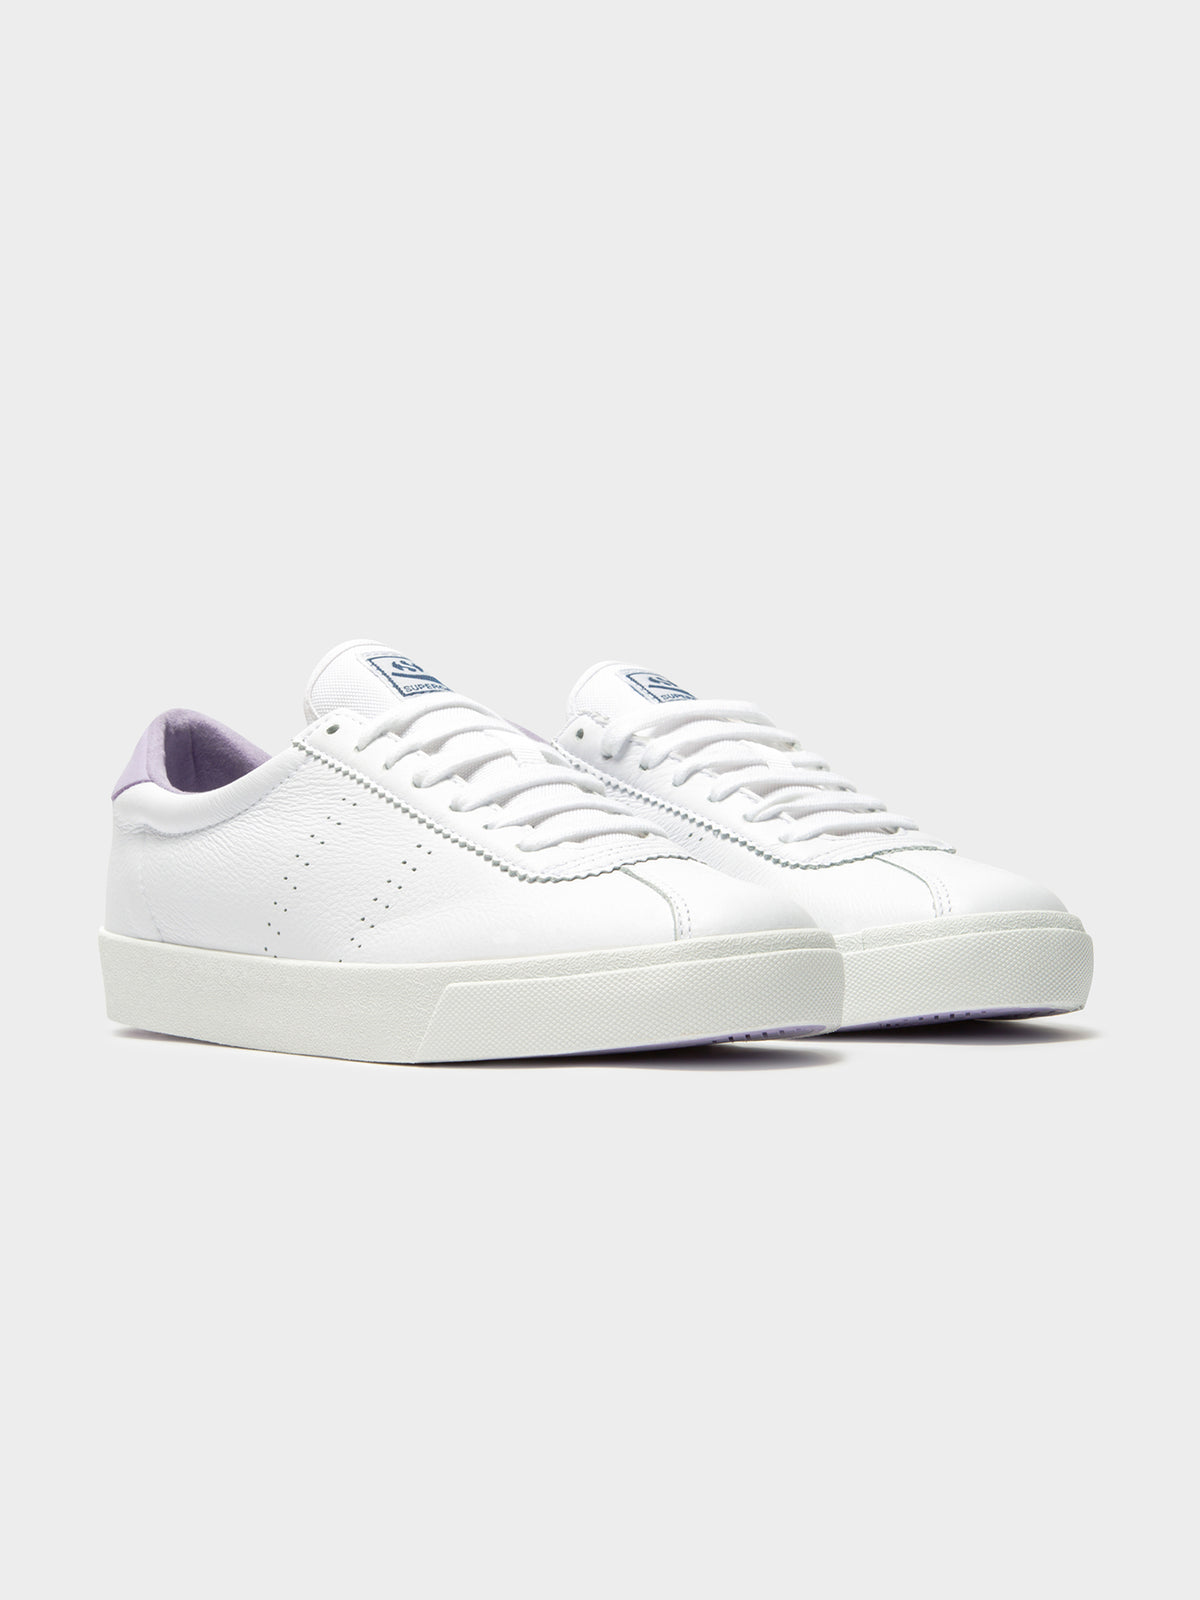 Womens 2843 Clubs Comfleau Sneakers in White &amp; Violet